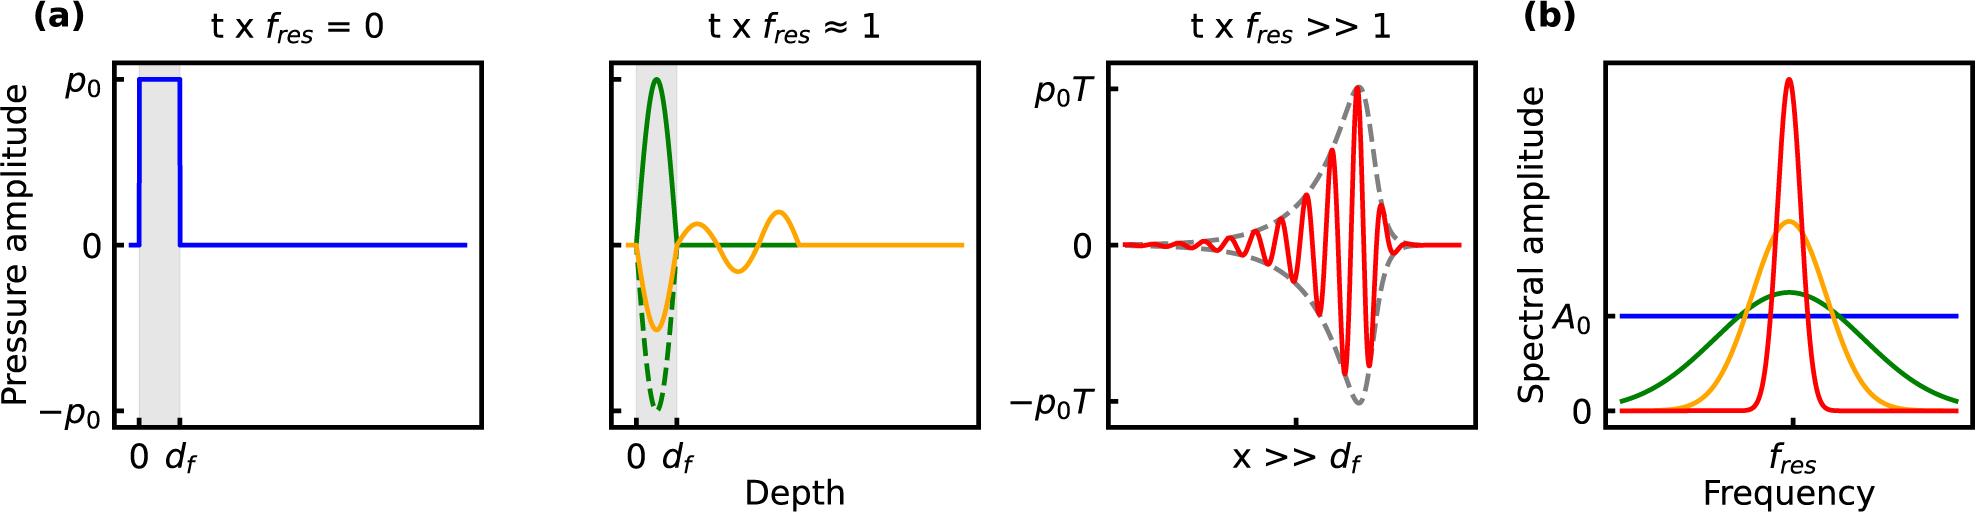 (a) Temporal evolution of the initially sharp pressure gradients towards the resonance frequency. (b) Corresponding frequency spectra. The instantaneous pressure (blue, ) shows steep gradients at the modulator foil (shaded region, thickness = ) interfaces corresponding to a broadband frequency spectrum. After the oscillation build-up, all off-resonant frequencies are canceled by destructive interference, and a standing wave (green, ) at resonance frequency, here , emerges. With each cycle a fraction of its amplitude, defined by the acoustic transmittance , is released into the medium as exemplified by the yellow curve (). Thus, the spectrum narrows and the spectral amplitude ( energy content) increases around the resonance frequency. Overall, a pulse train is emitted by the modulator characterized by an envelope (gray dashed) with a build-up function fitted as , which is defined by the modulator’s 3D extent and a ring-down function depending on the material’s acoustic reflectivity, . The characteristic times and specify the signal’s rise and decay time, respectively. The entire modulator signal (red) is thus given by with and a carrier frequency of .